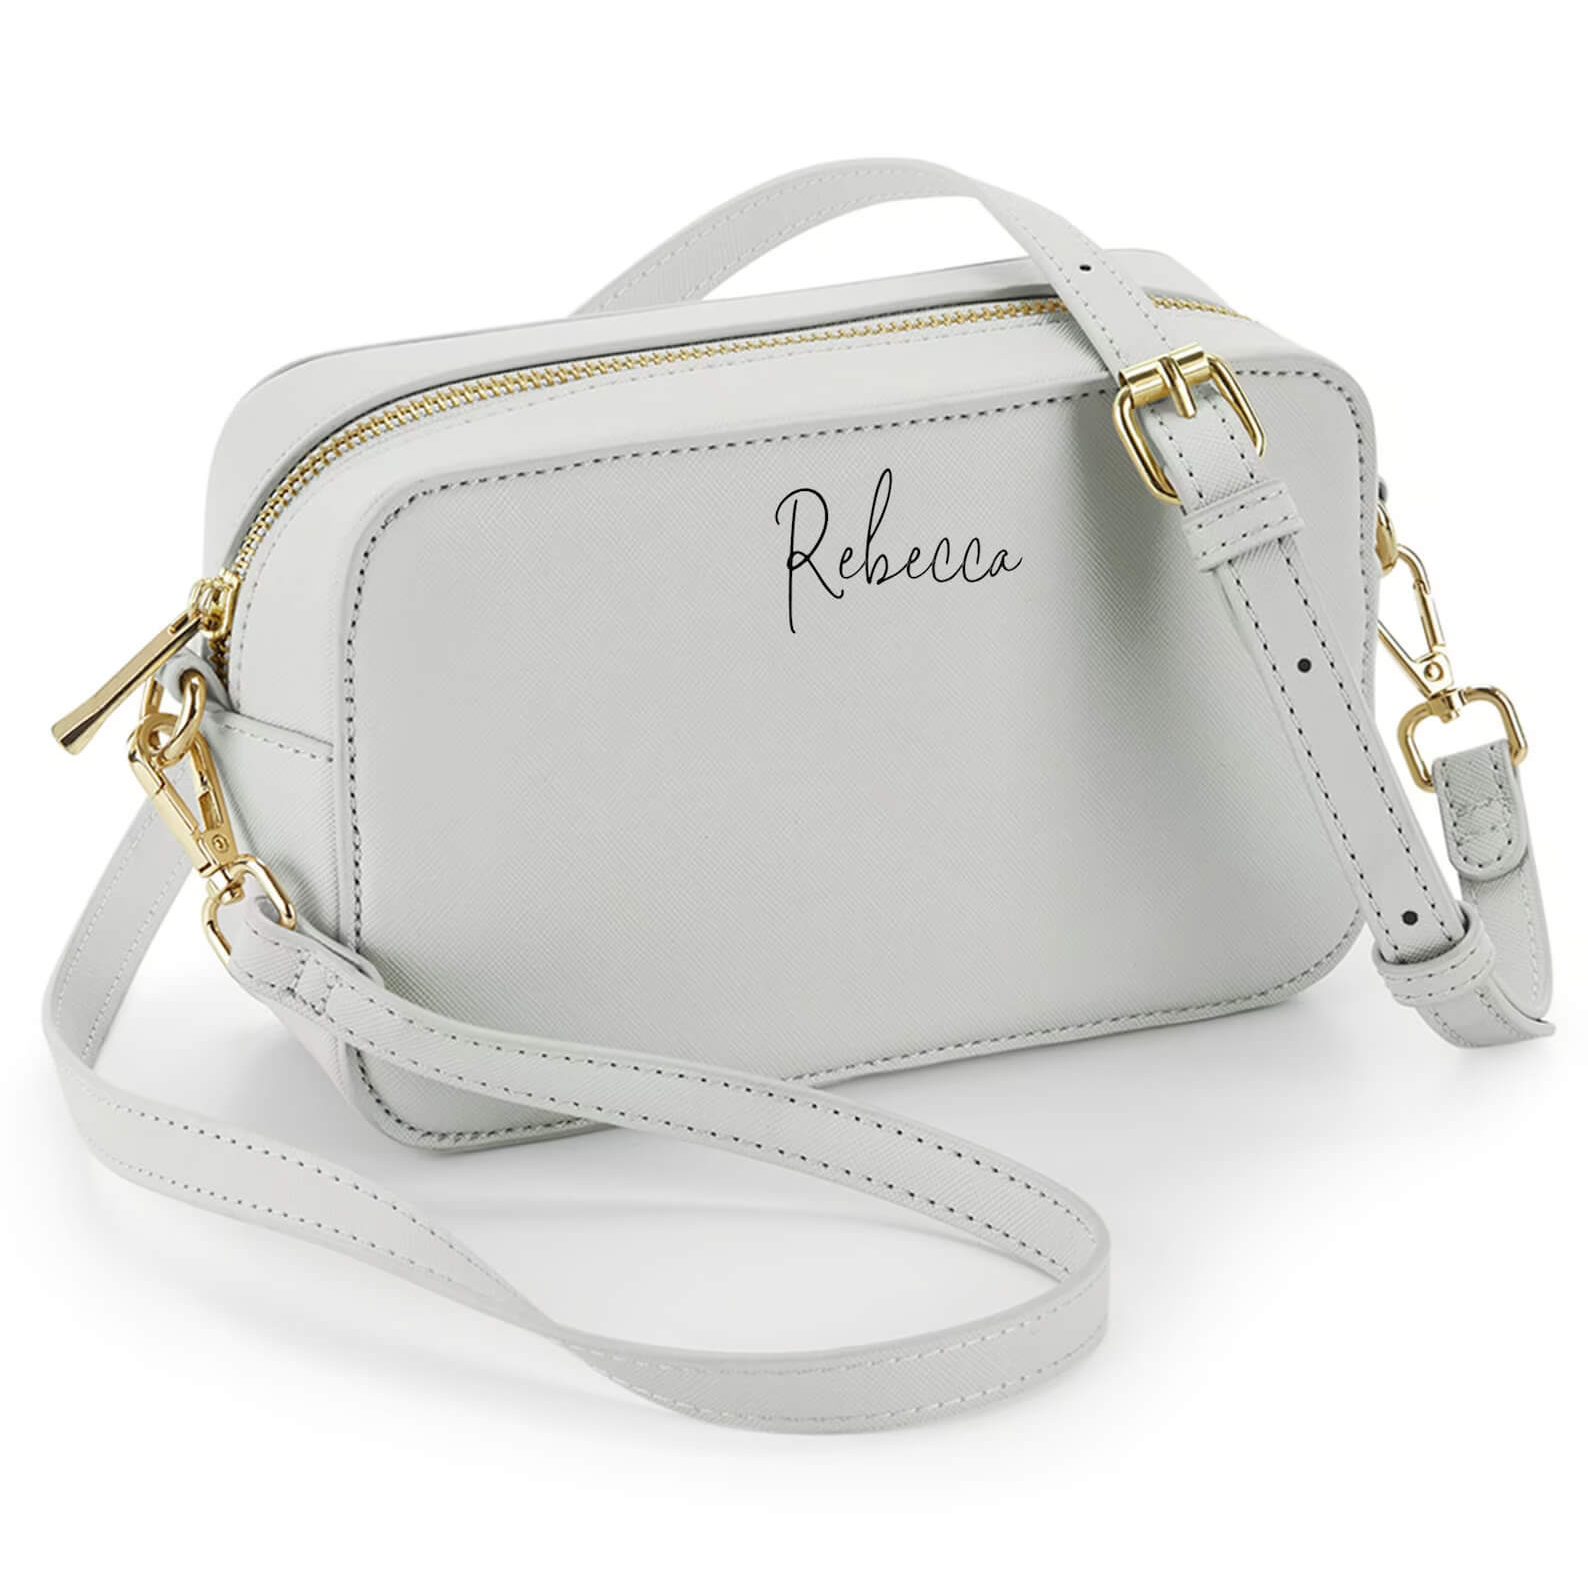 mothers day gifts for friends - Personalized Handbag